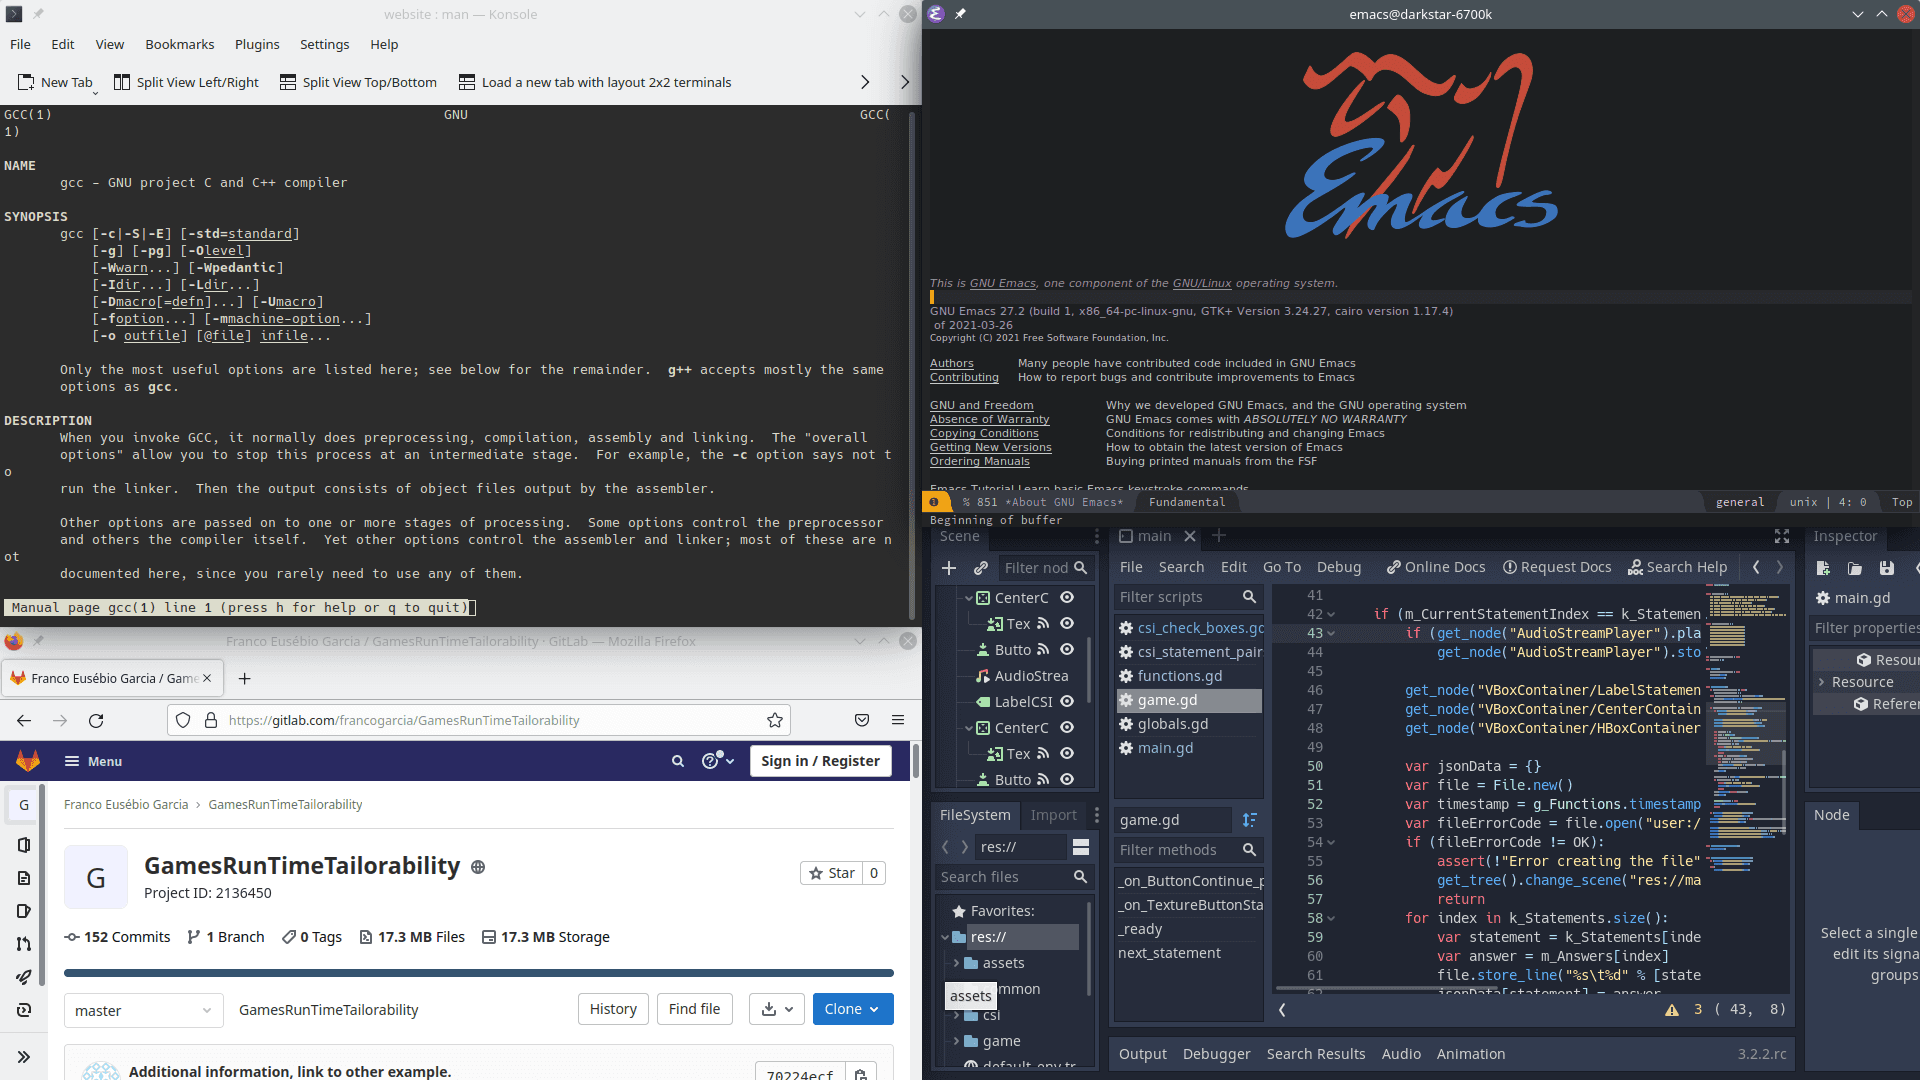 Some programs that can be used to develop software using a computer: the GCC compiler, the Emacs text editor, the Firefox web browser and the integragrated editor from Godot Engine.